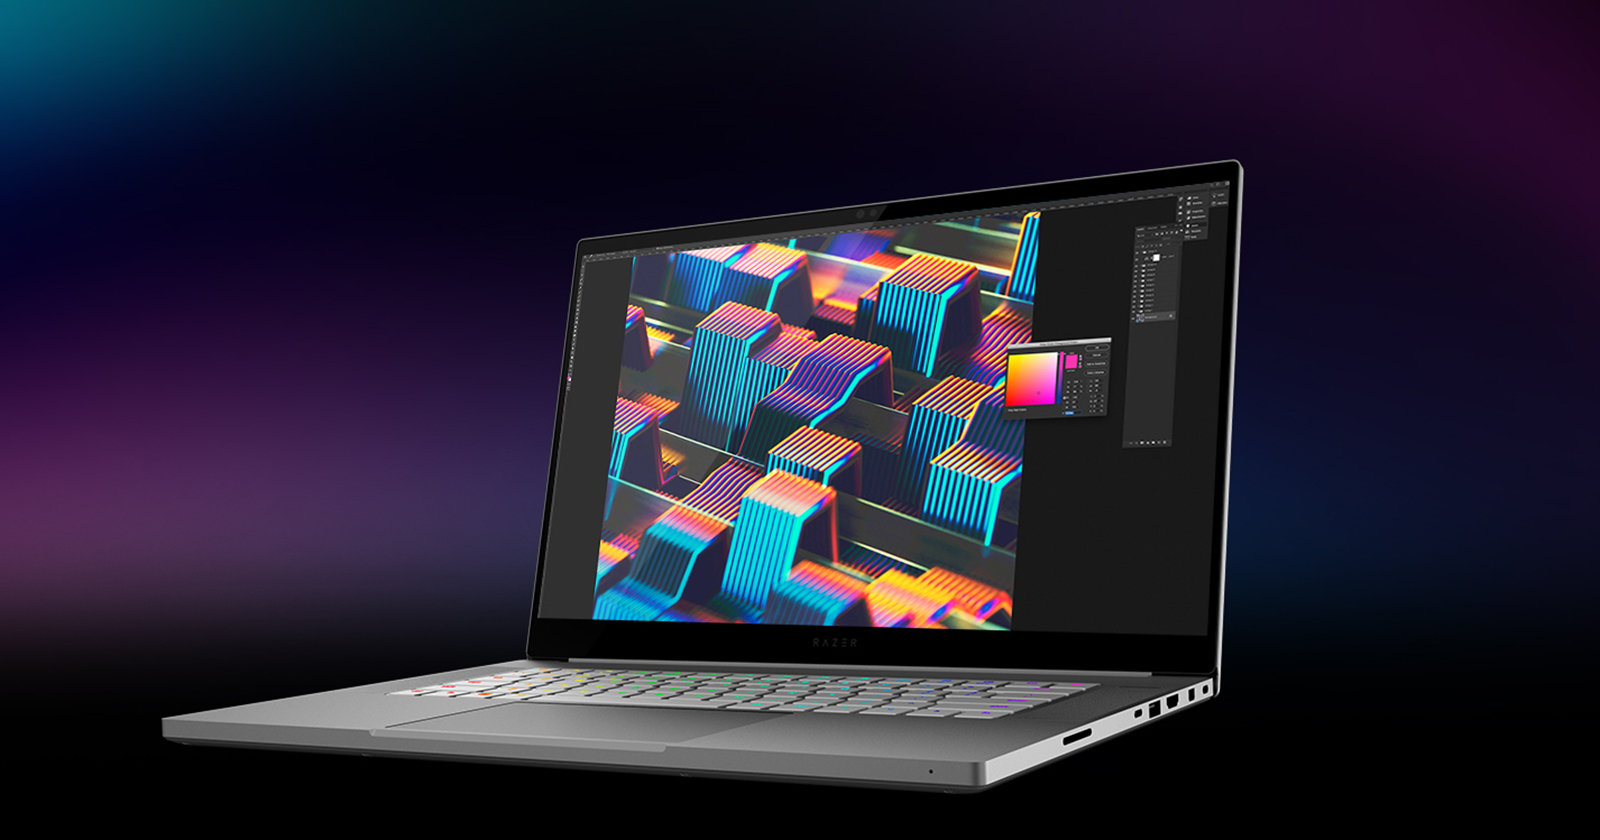 Razers Top of the Line Photo and Video Editing Laptop is Cheaper than Expected